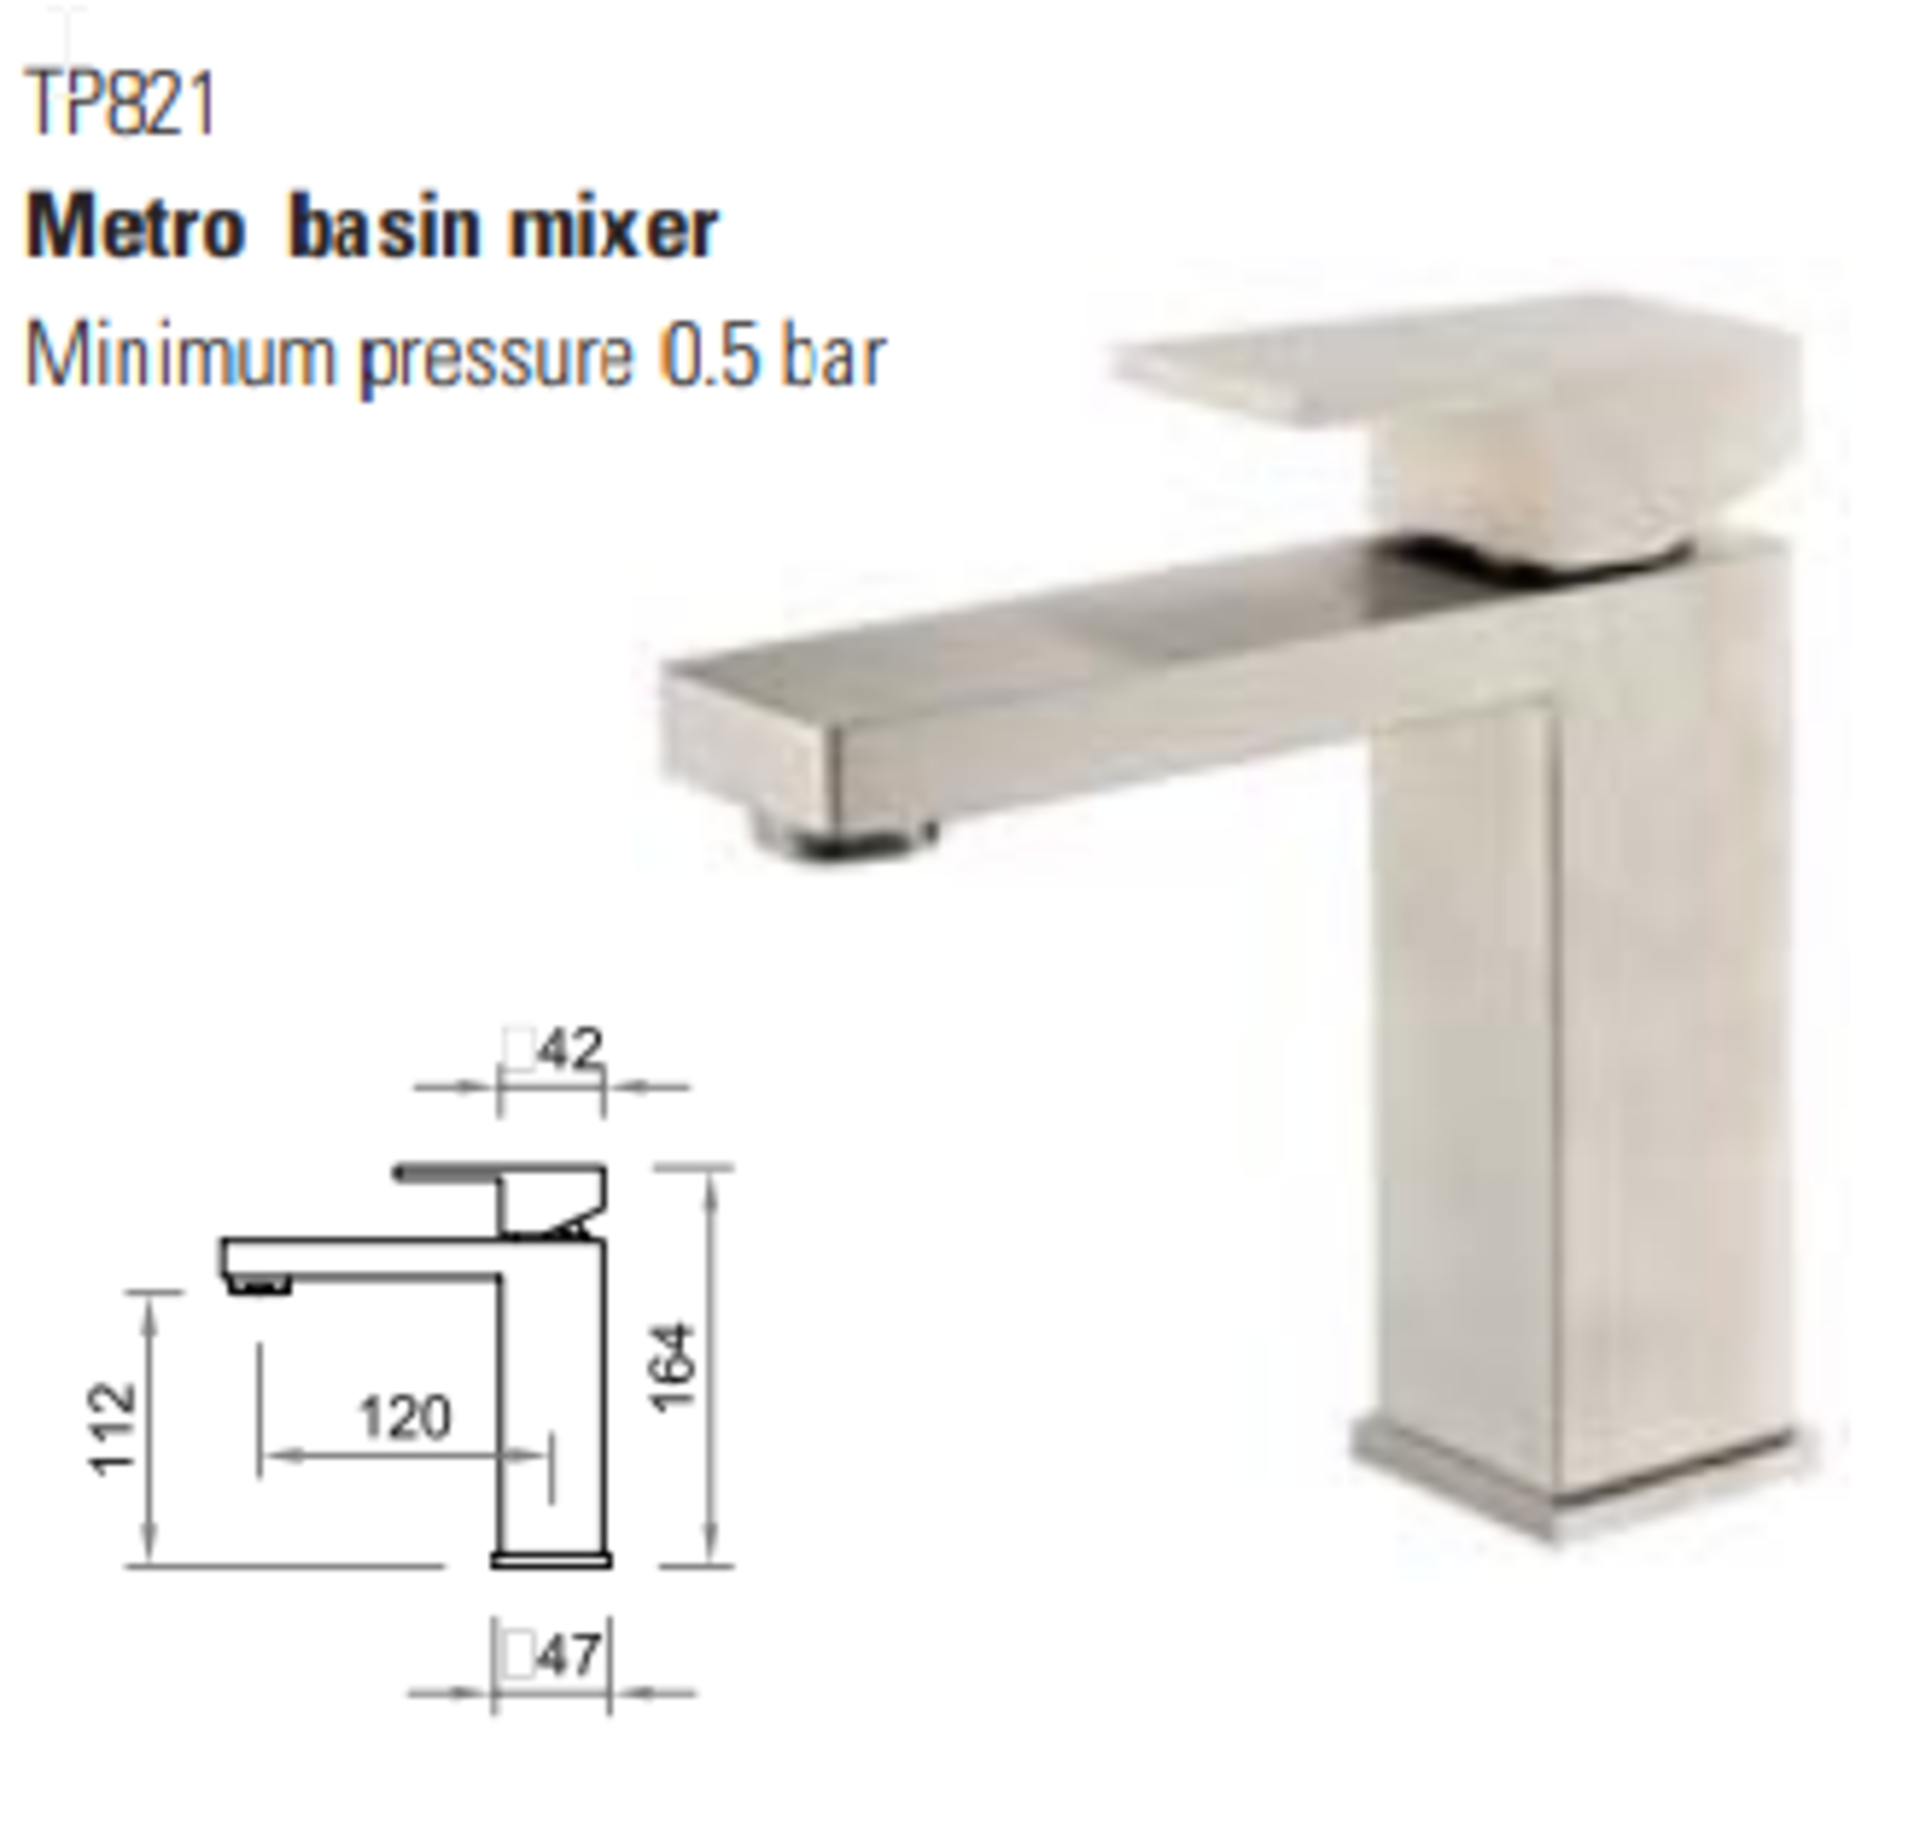 1 x Stonearth 'Metro' Stainless Steel Basin Mixer Tap - Brand New & Boxed - CL713 - RRP £245 -